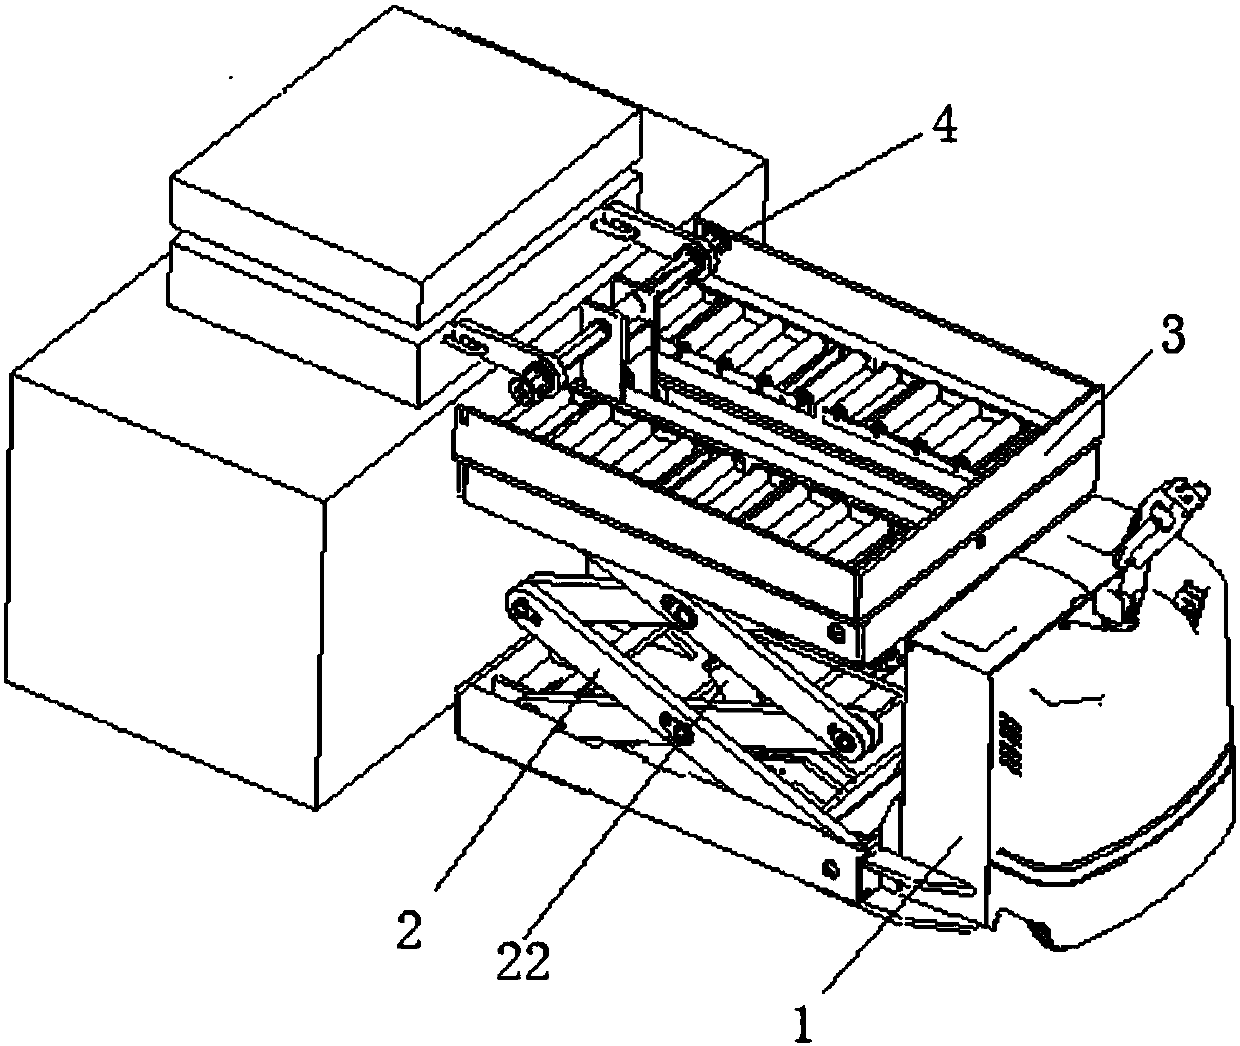 Push-and-pull device applicable to loading and unloading of molds in multiple specifications